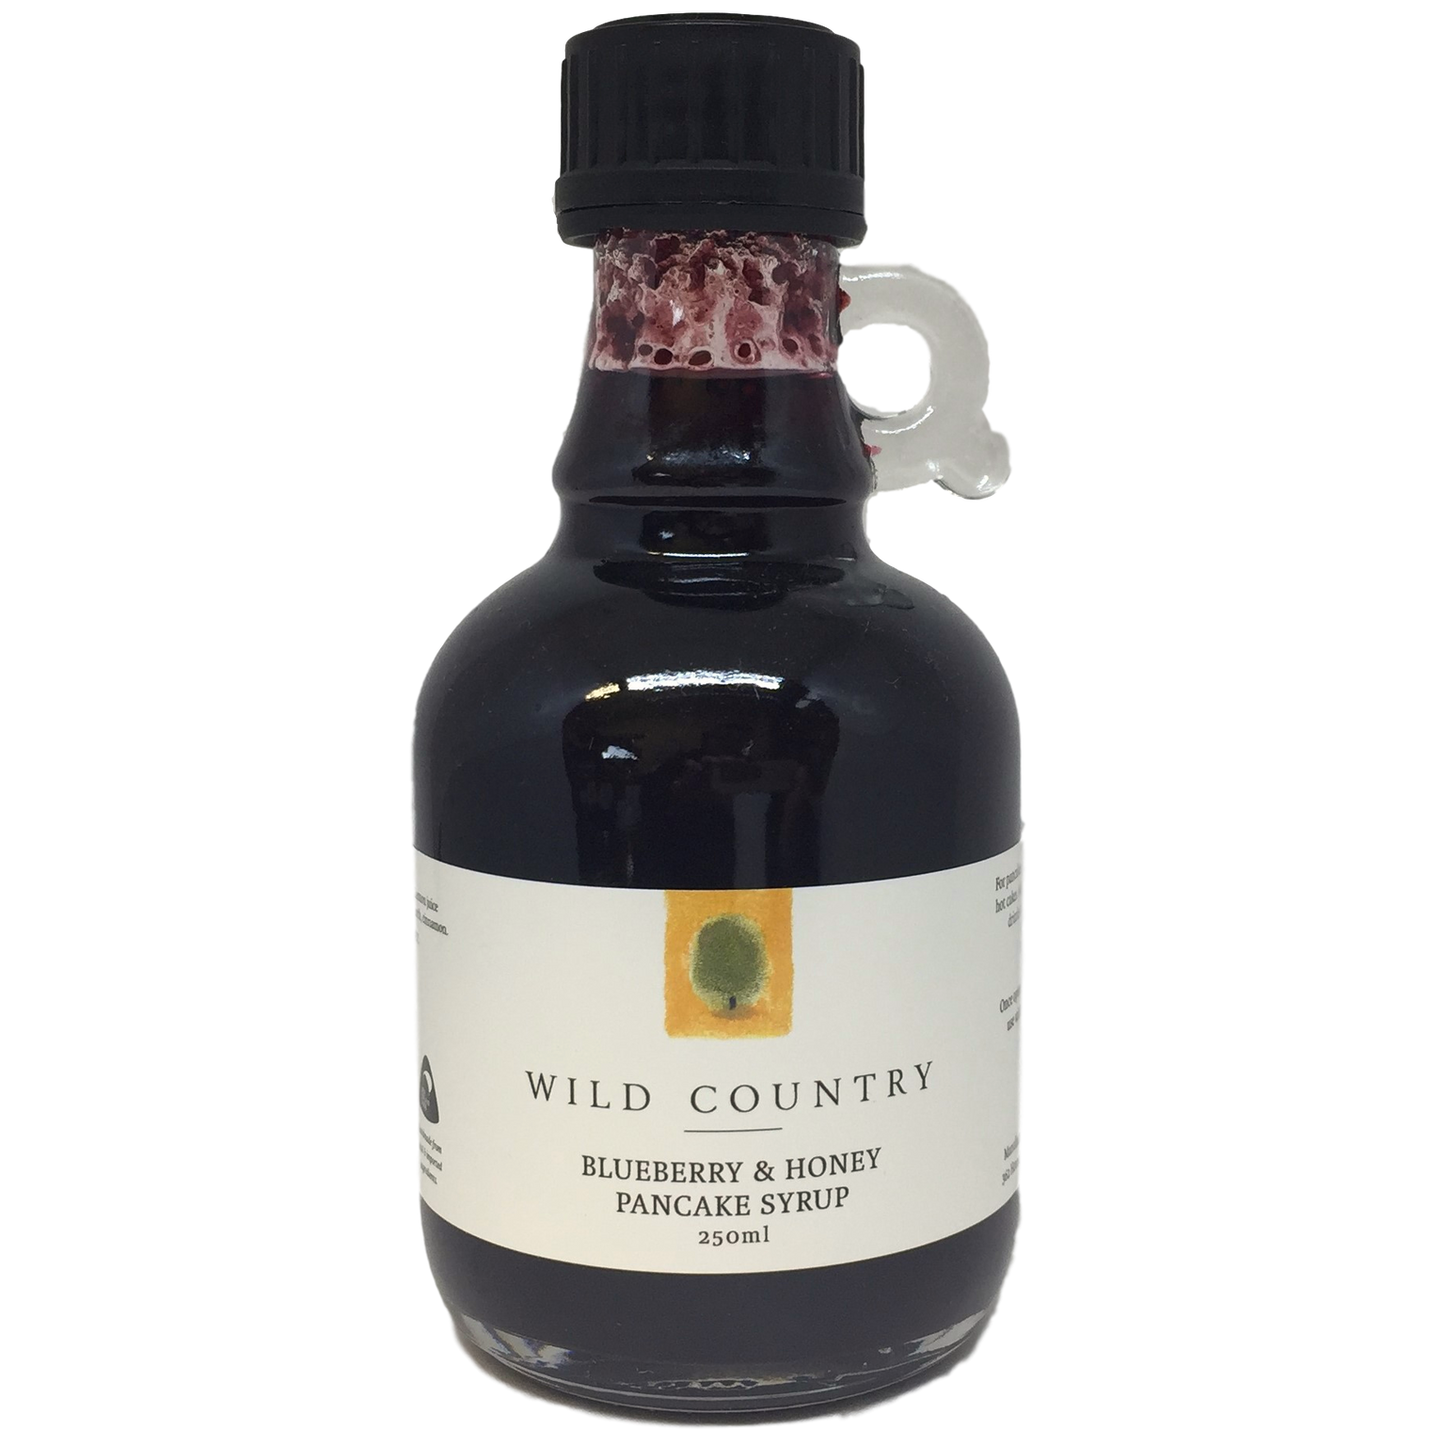 Wild Country - Blueberry and Honey Pancake Syrup